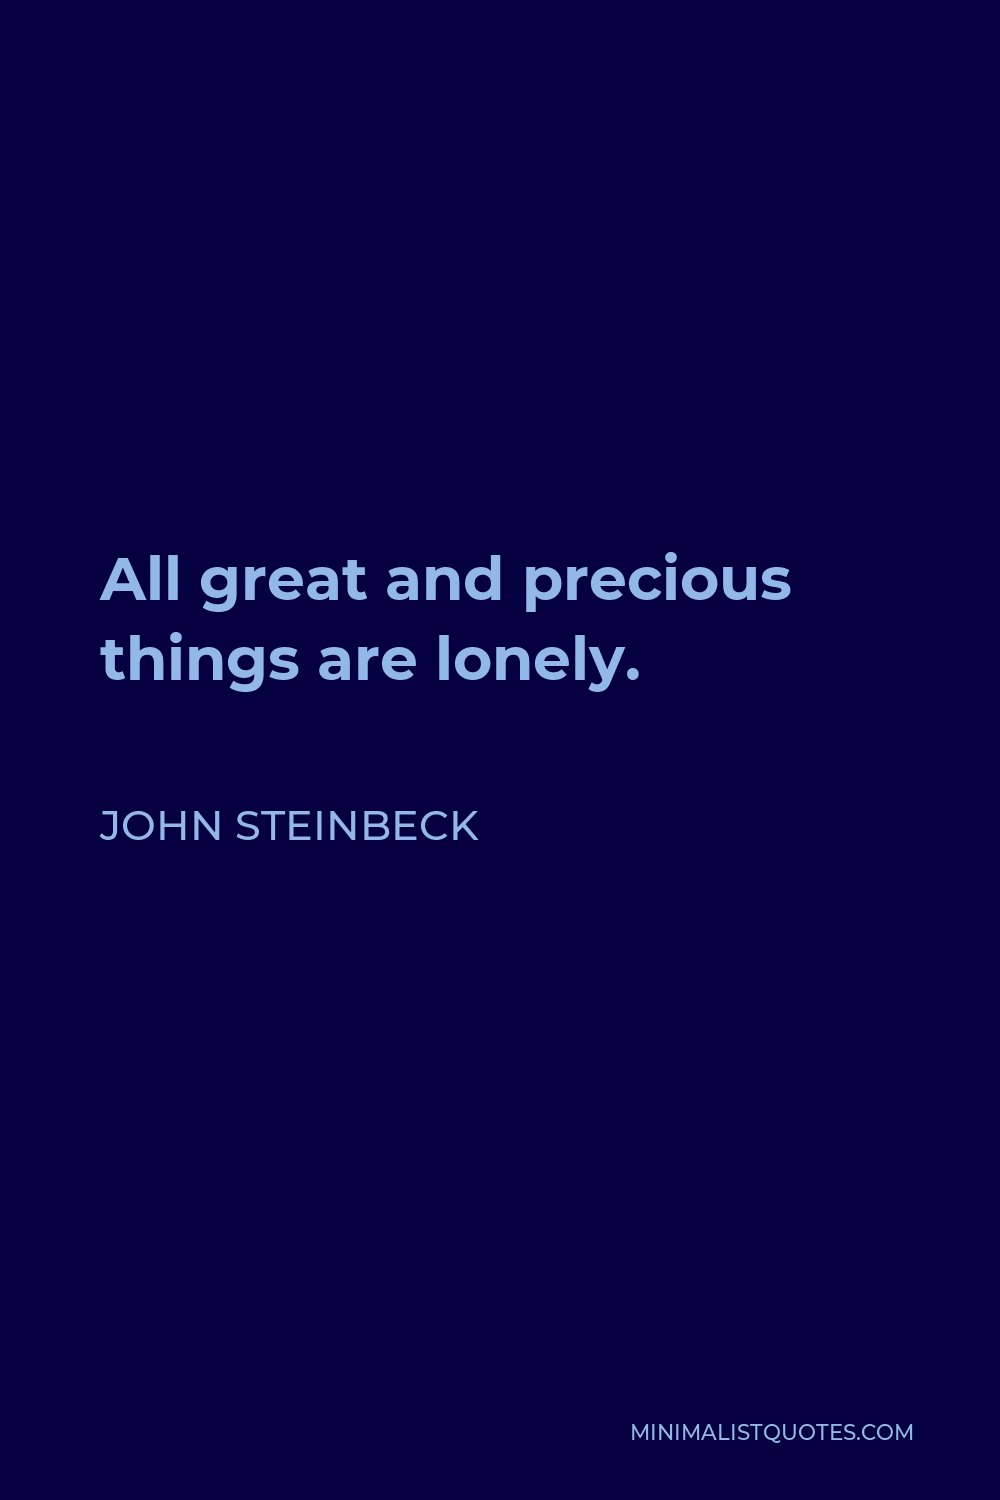 John Steinbeck Quote - All great and precious things are lonely.